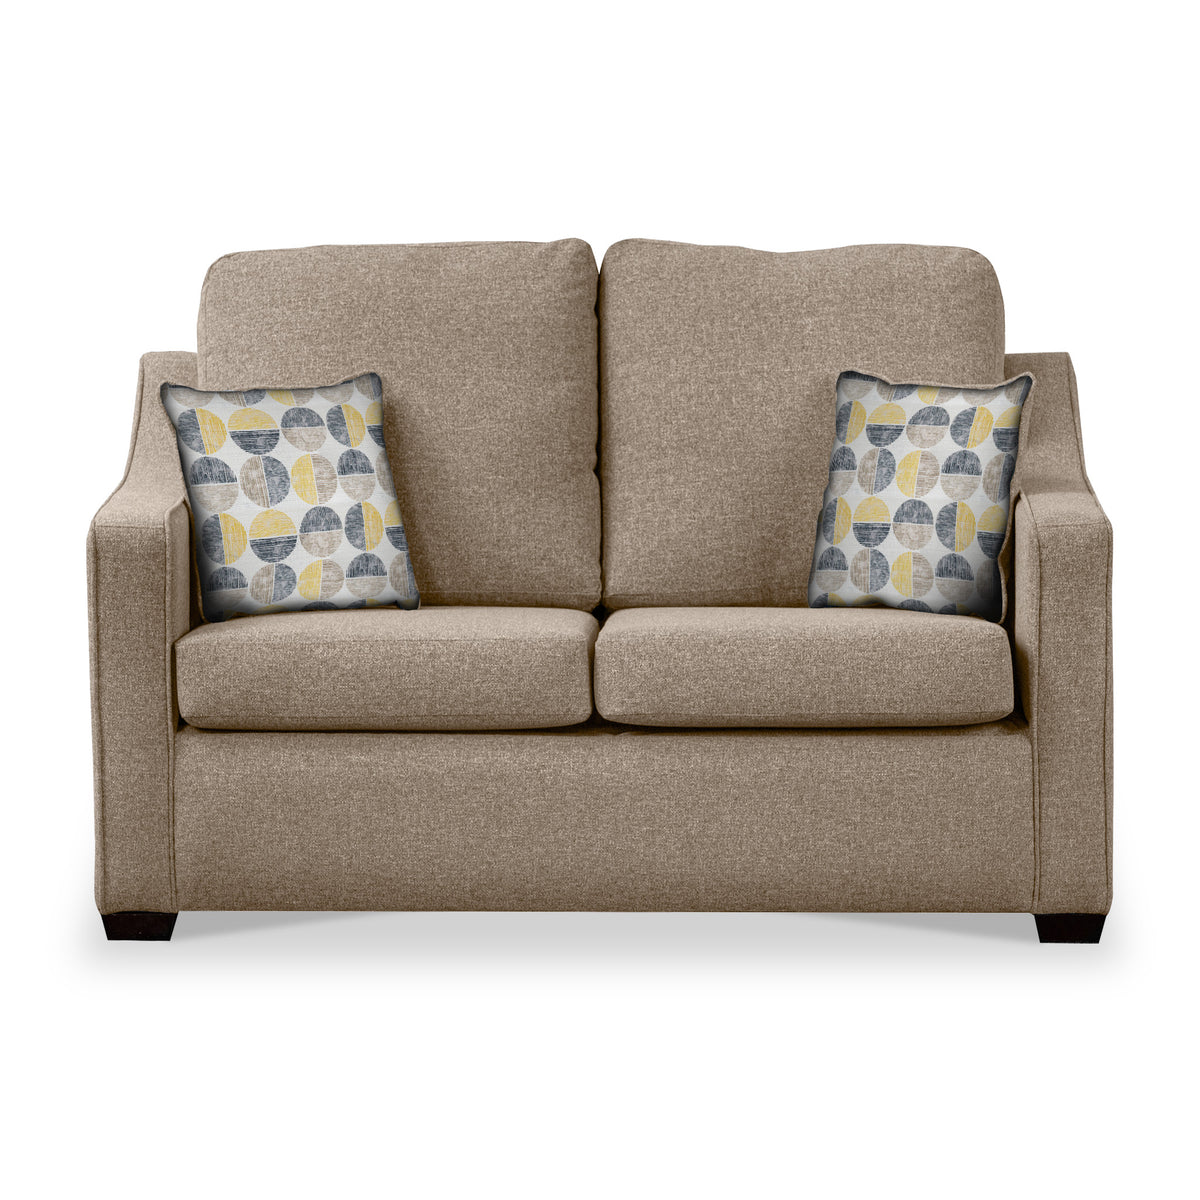 Fenton Fawn Soft Weave 2 Seater Sofabed with Beige Scatter Cushions from Roseland Furniture